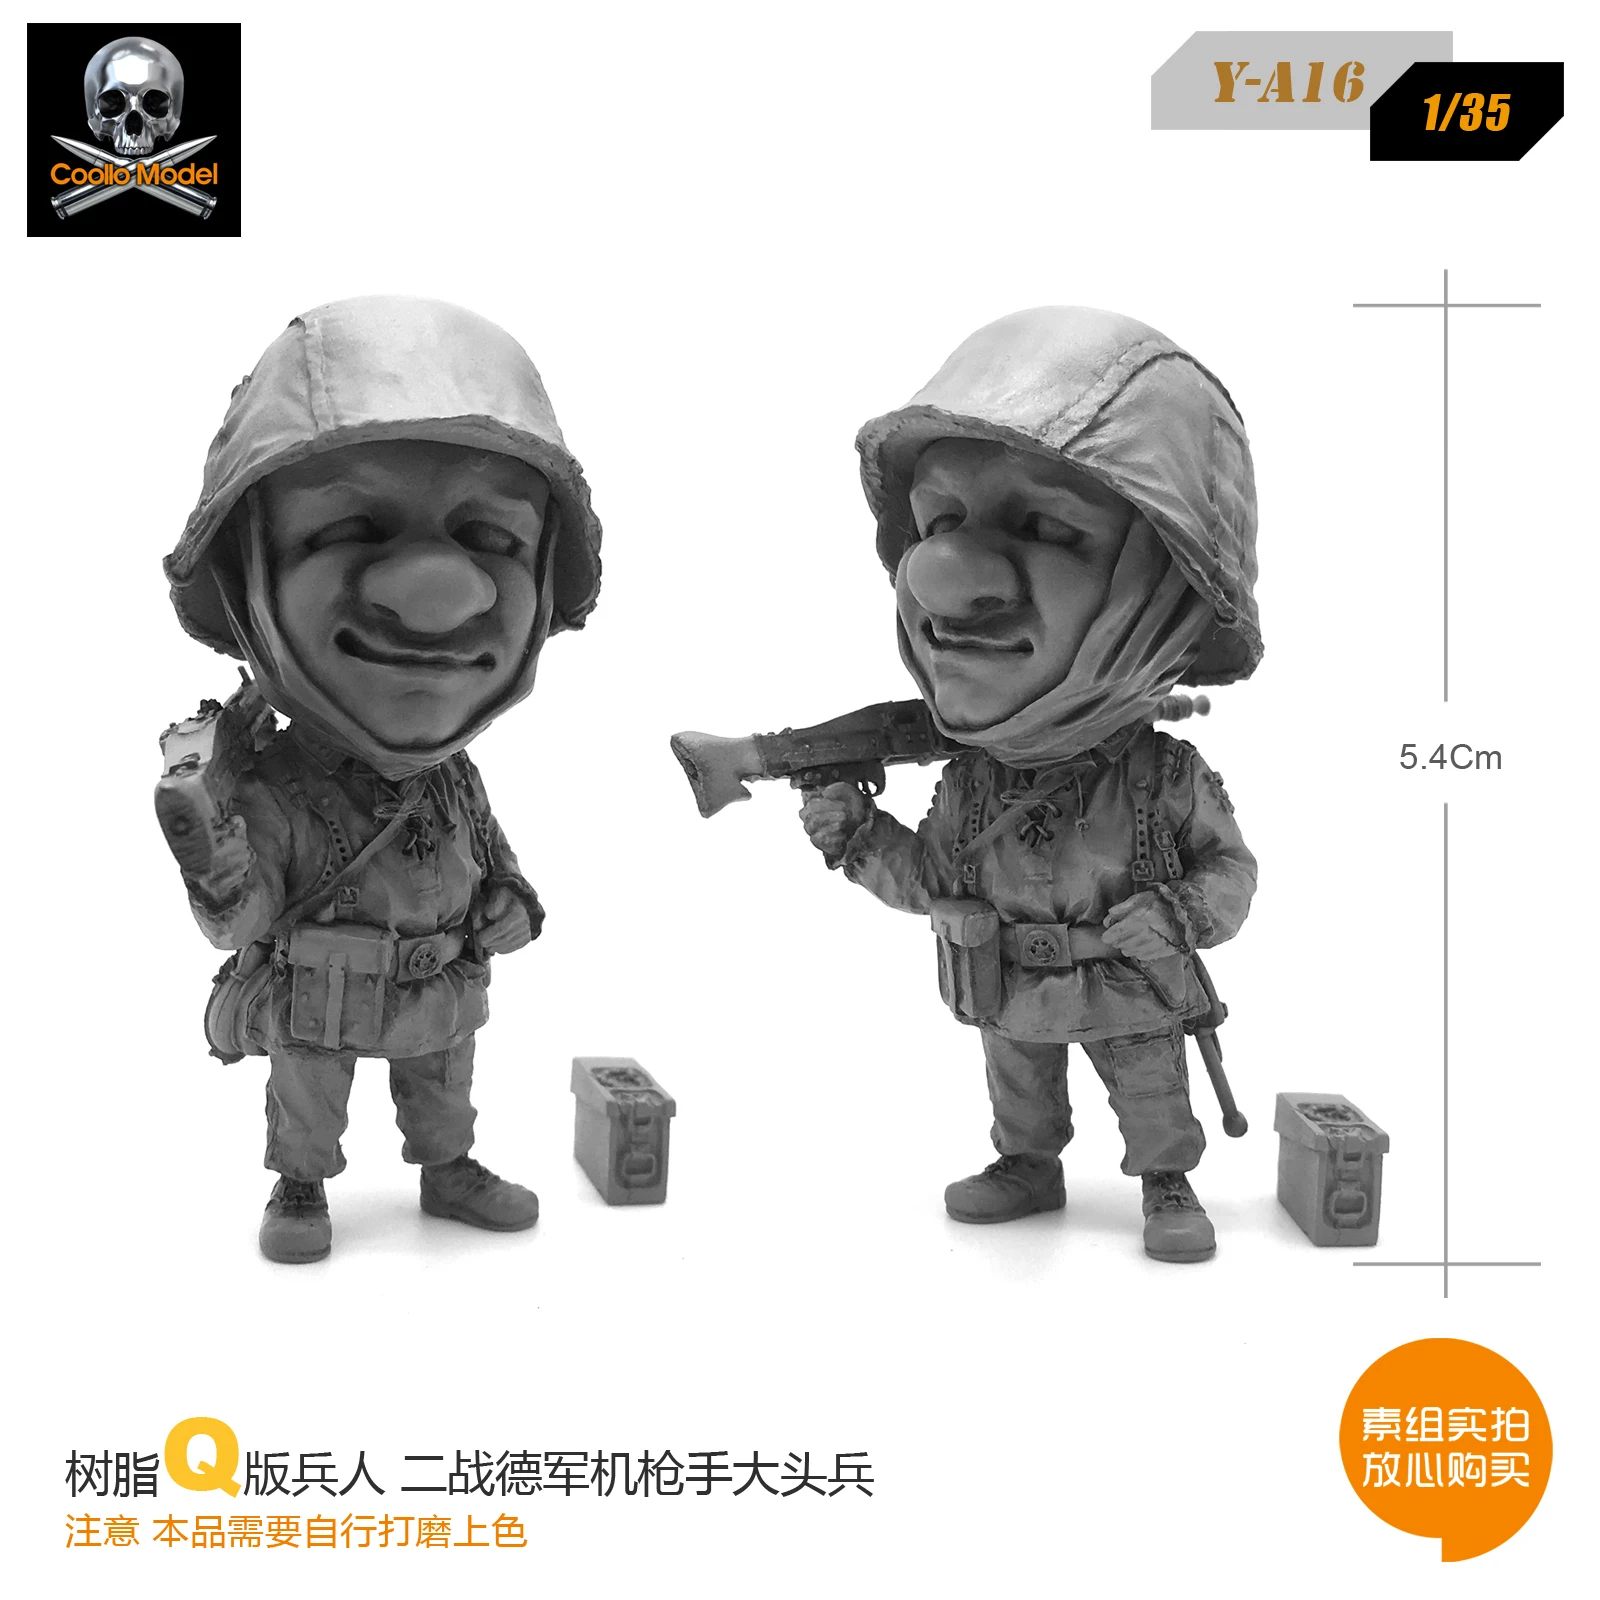 

Resin Figure Q Soldier Model Y-a16 Of German Machine Gunners In World War Ii Unmounted Ande Uncolored A16